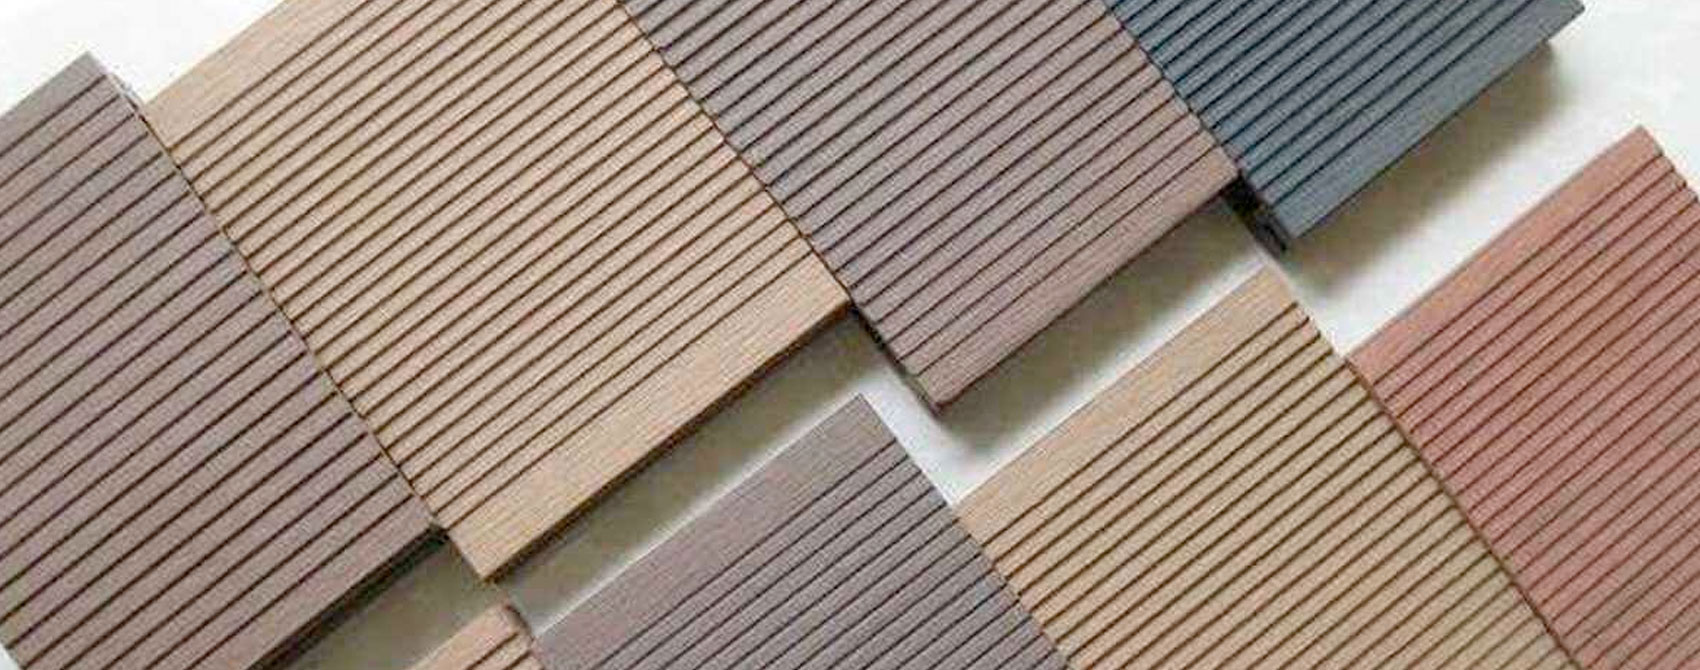 Why is wood plastic composite So Exciting?